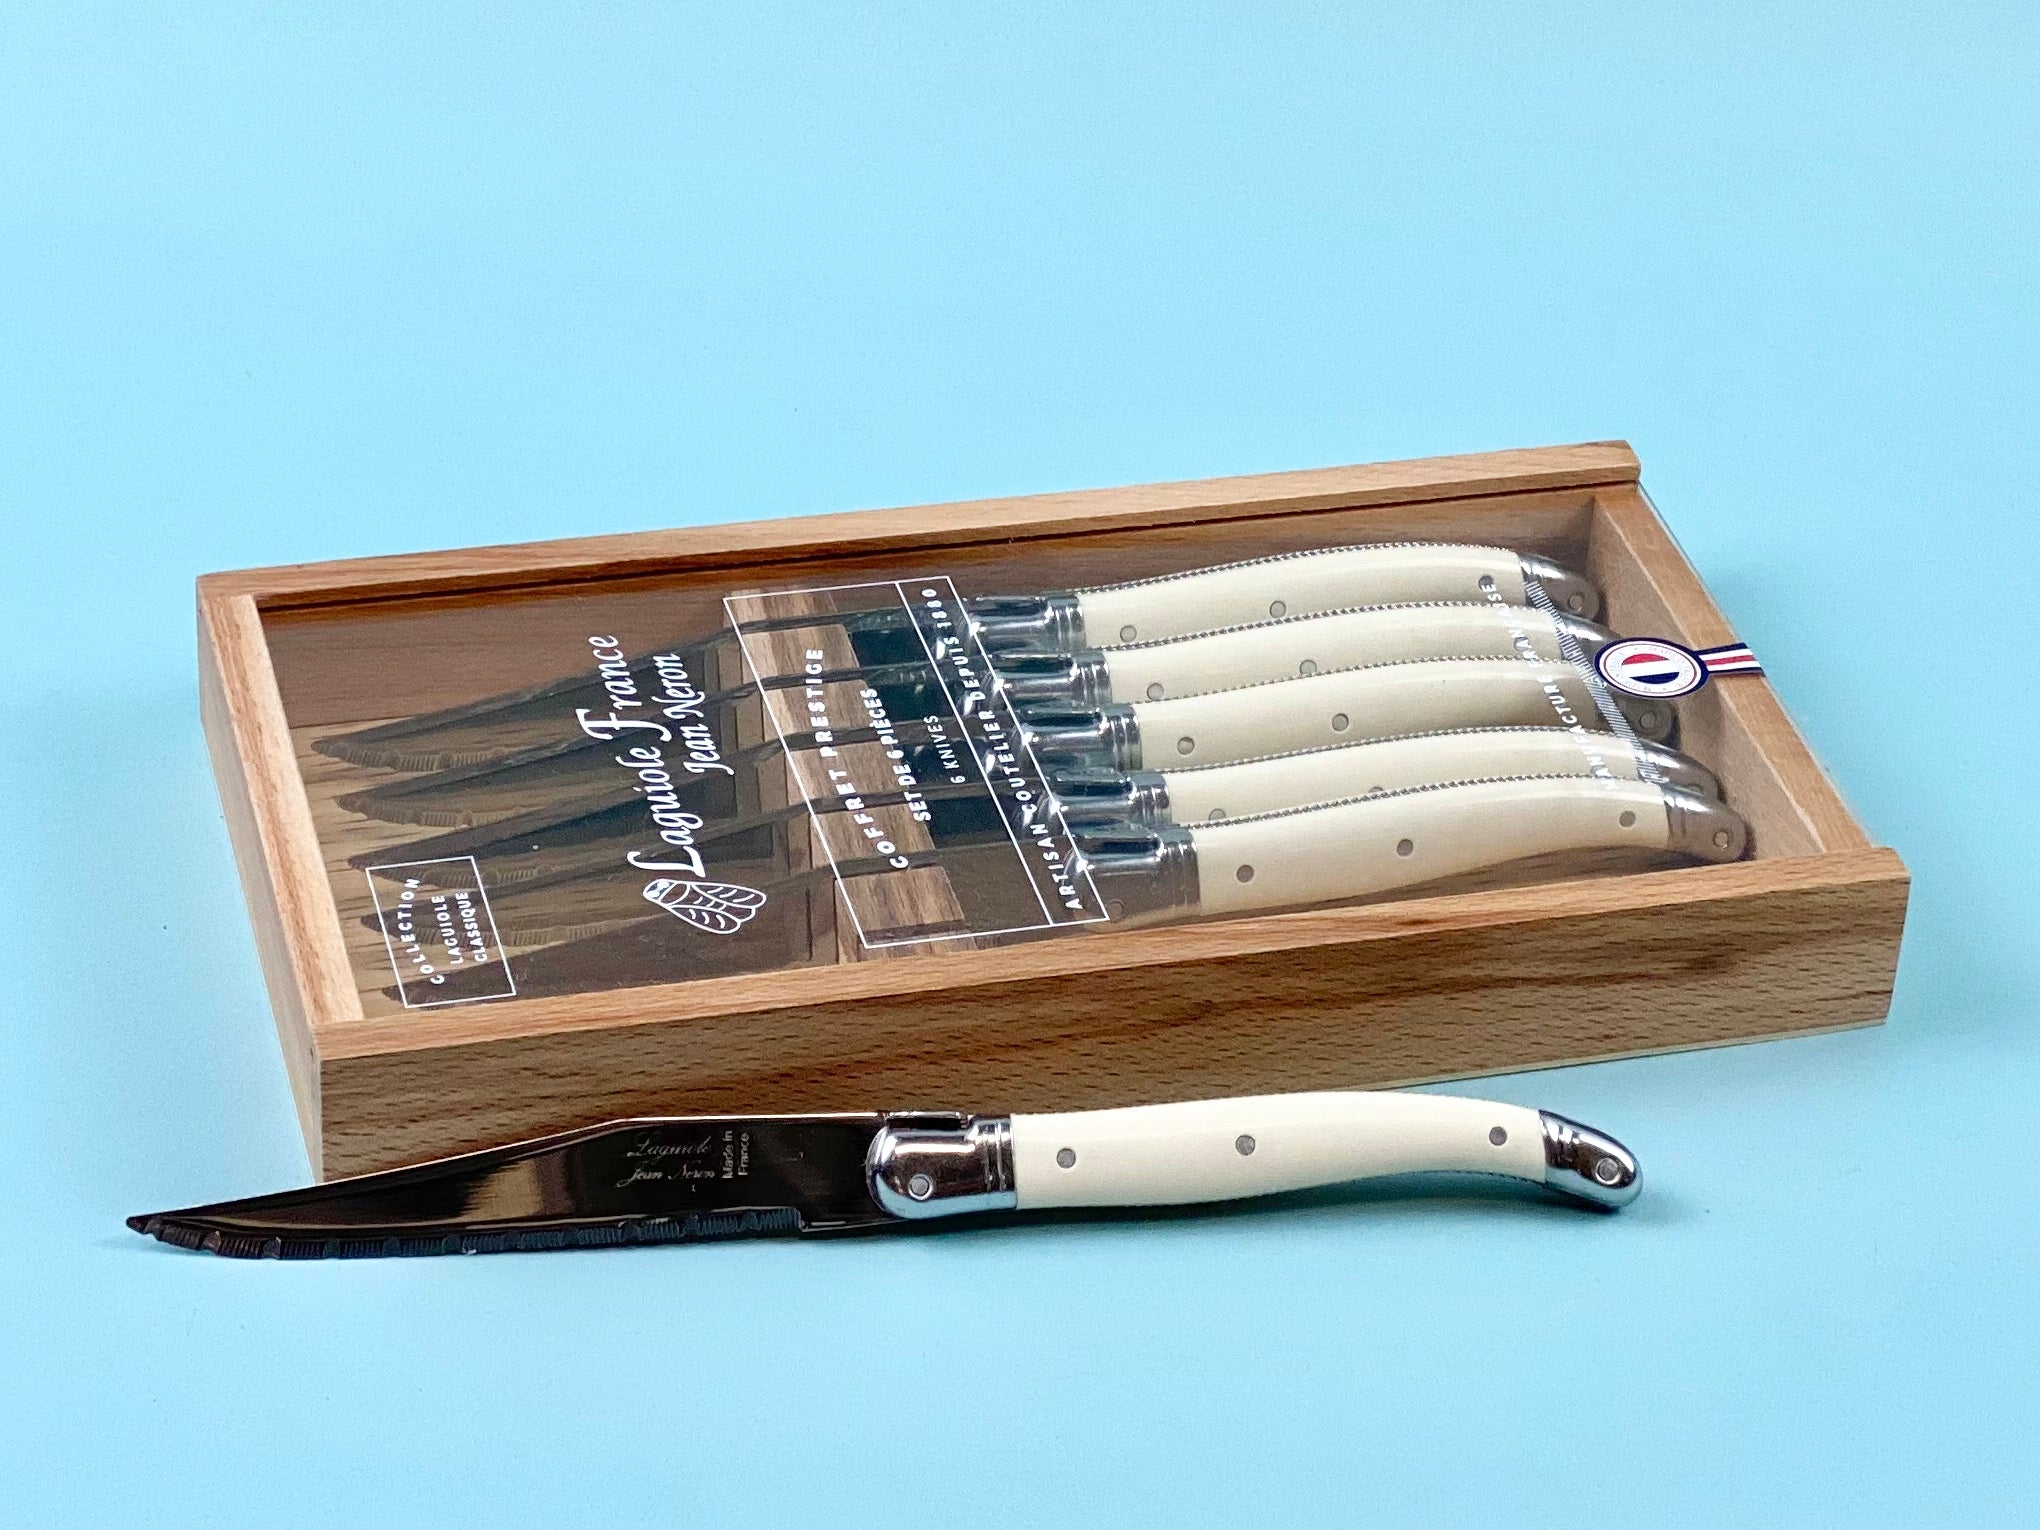 Laguiole Ivory Platine Knives in Wooden Box with Acrylic Lid (Set of 6) Cutlery Laguiole Brand_Laguiole Flatware Sets Kitchen_Dinnerware Kitchen_Kitchenware Laguiole 790160540MIAL